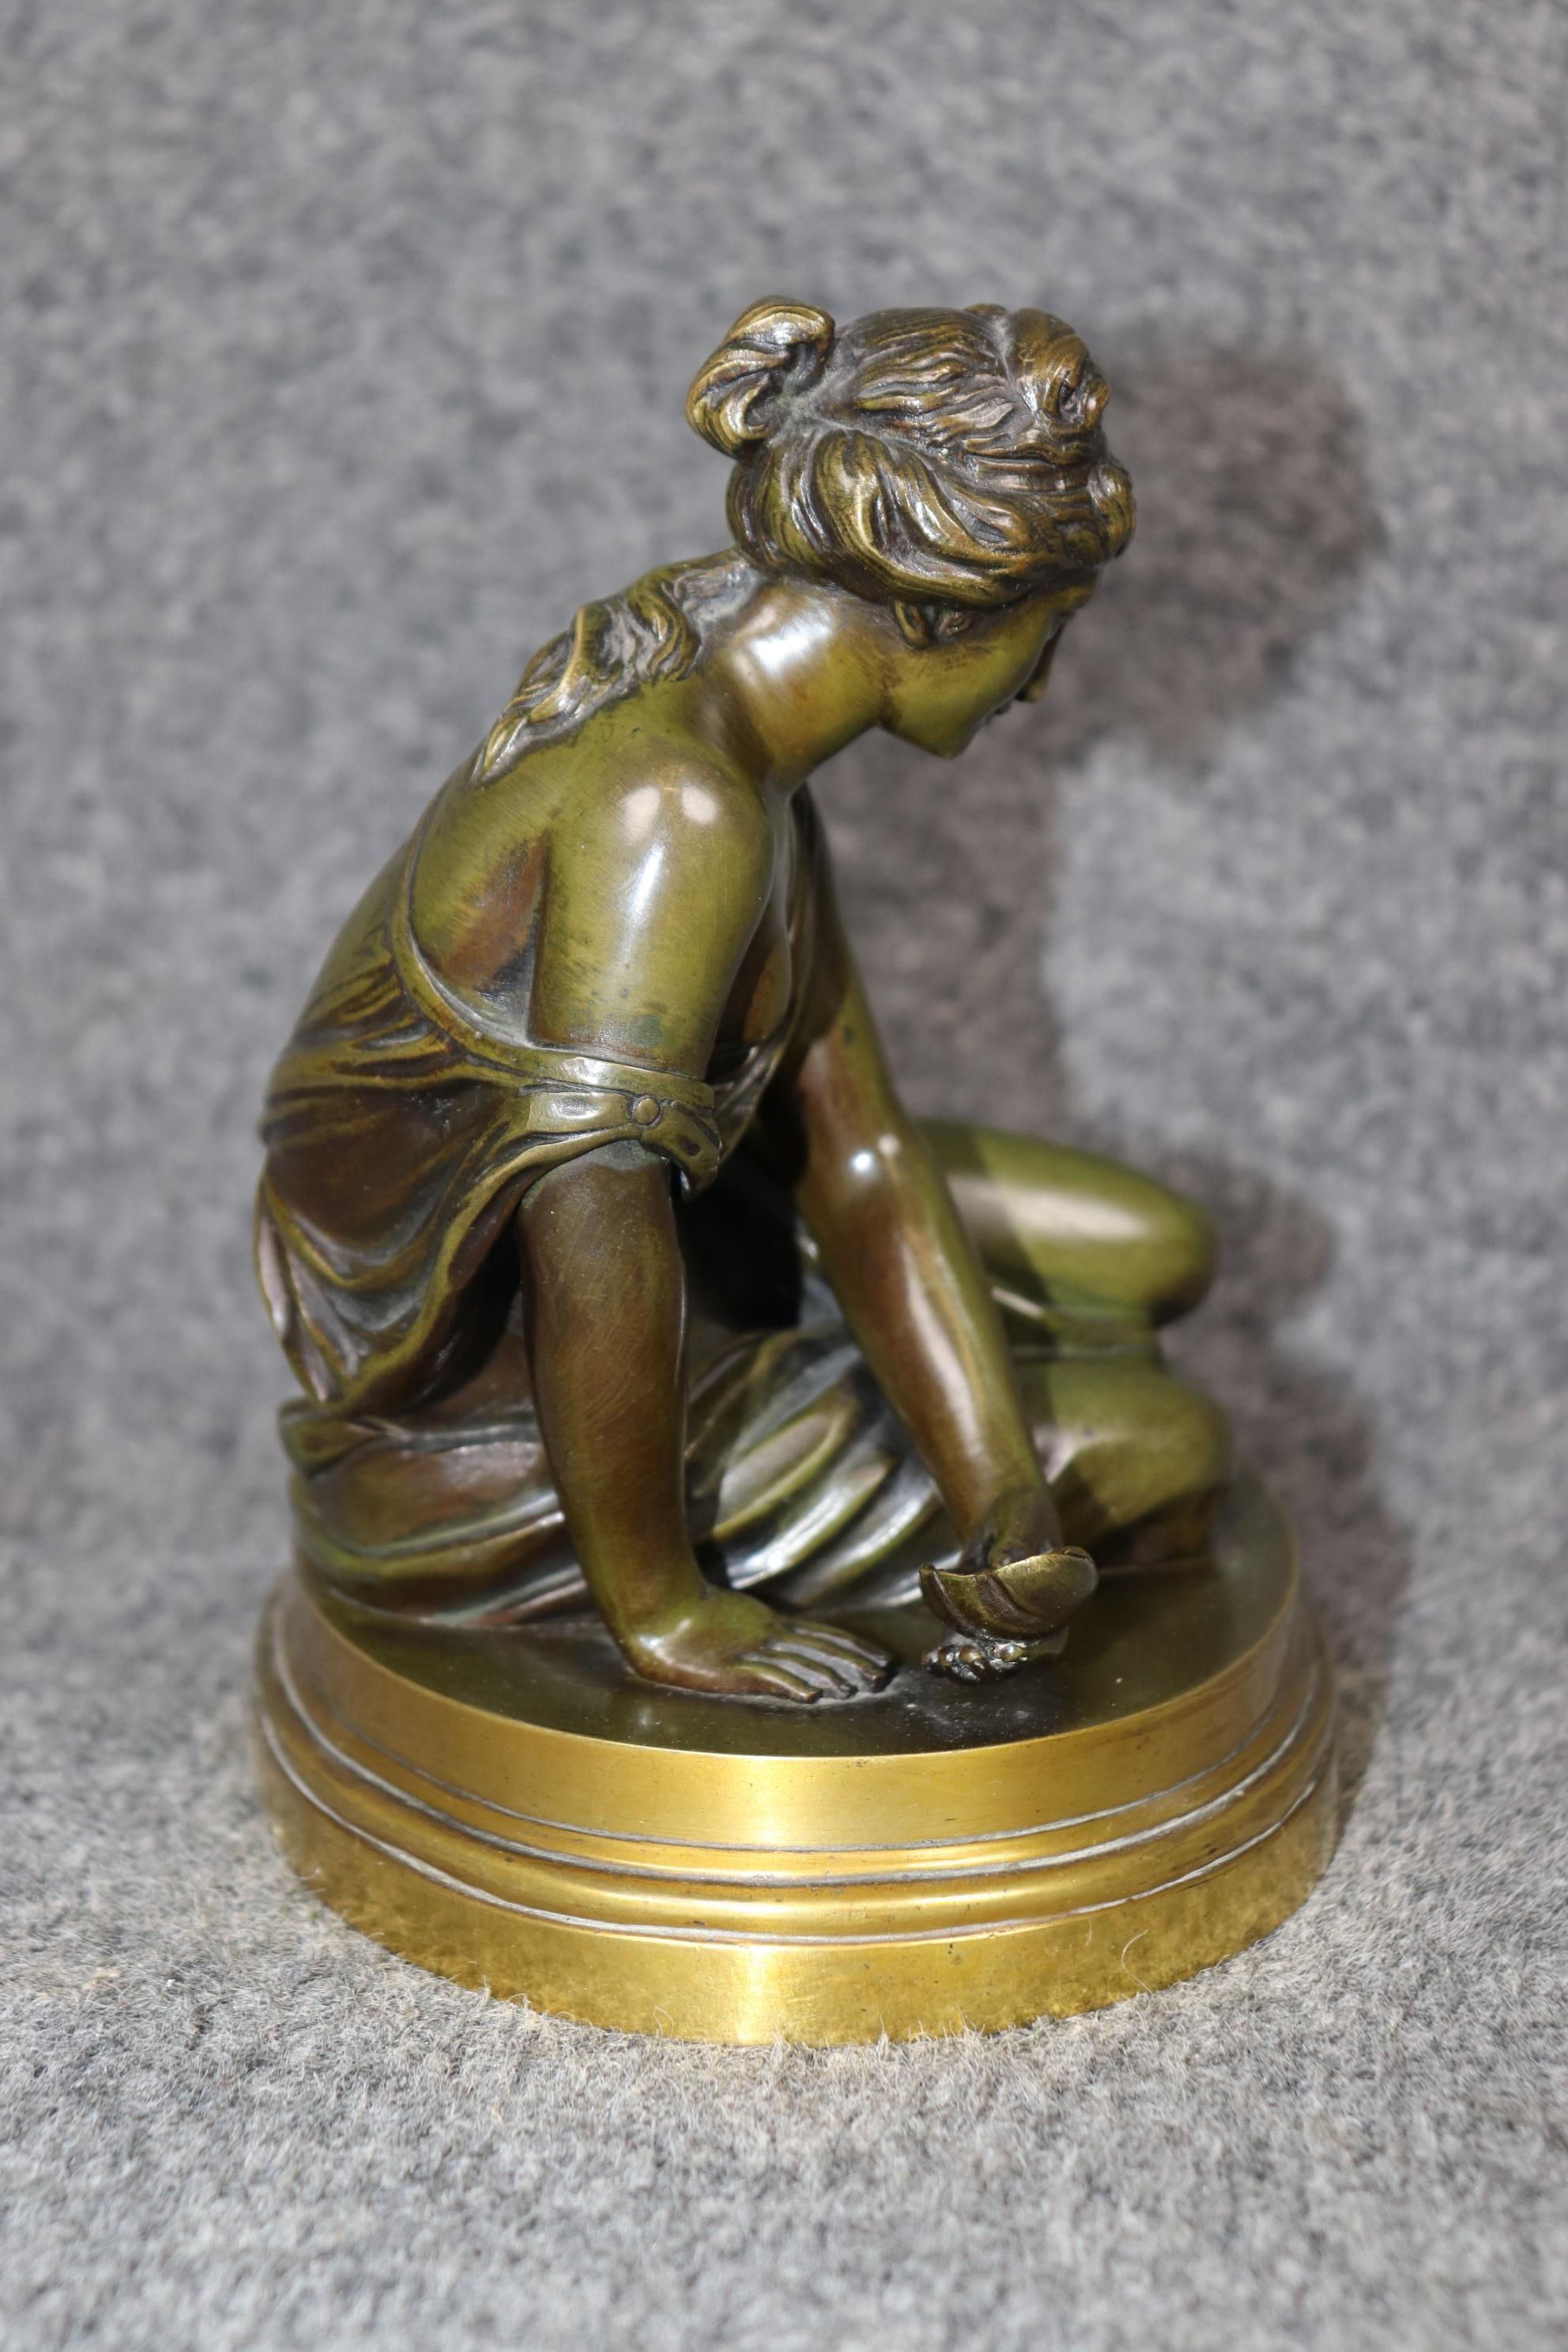 Dimensions - H: 7in W: 8in D: 5 1/2in 

This antique French Neoclassical figural bronze sculpture of a maiden, after Samson, is an incredible example of 20th century French decor! If you look at the photos provided, you can see the attention to